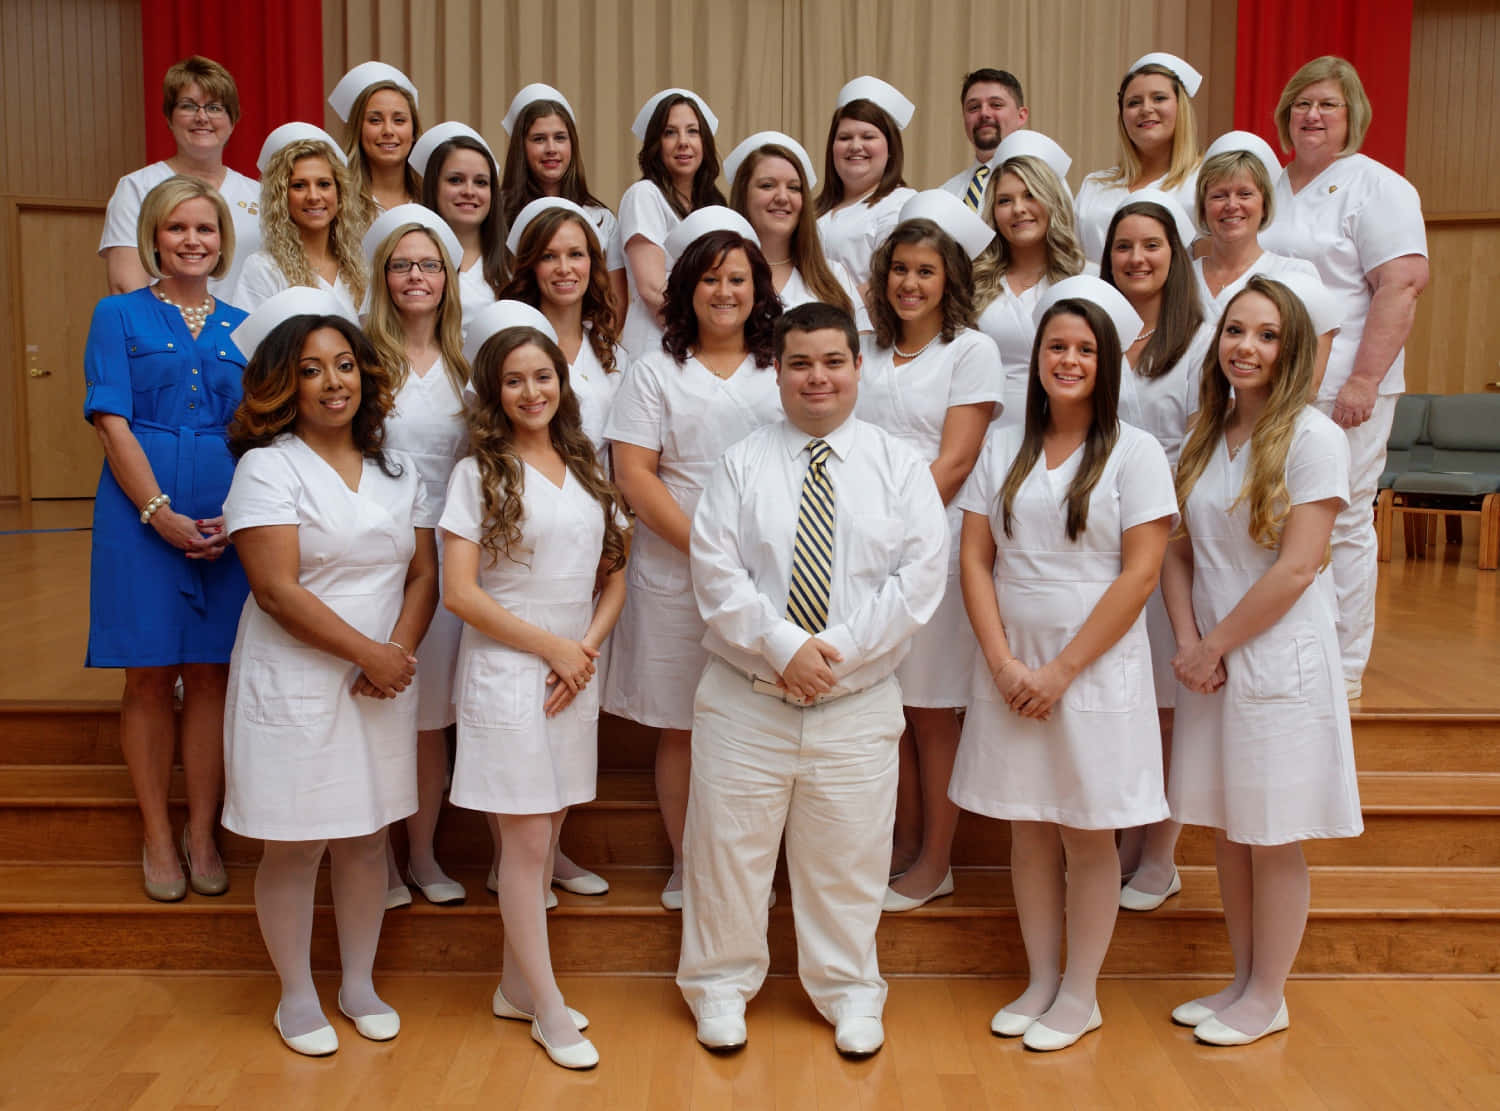 A Group Of Nurses Posing For A Photo